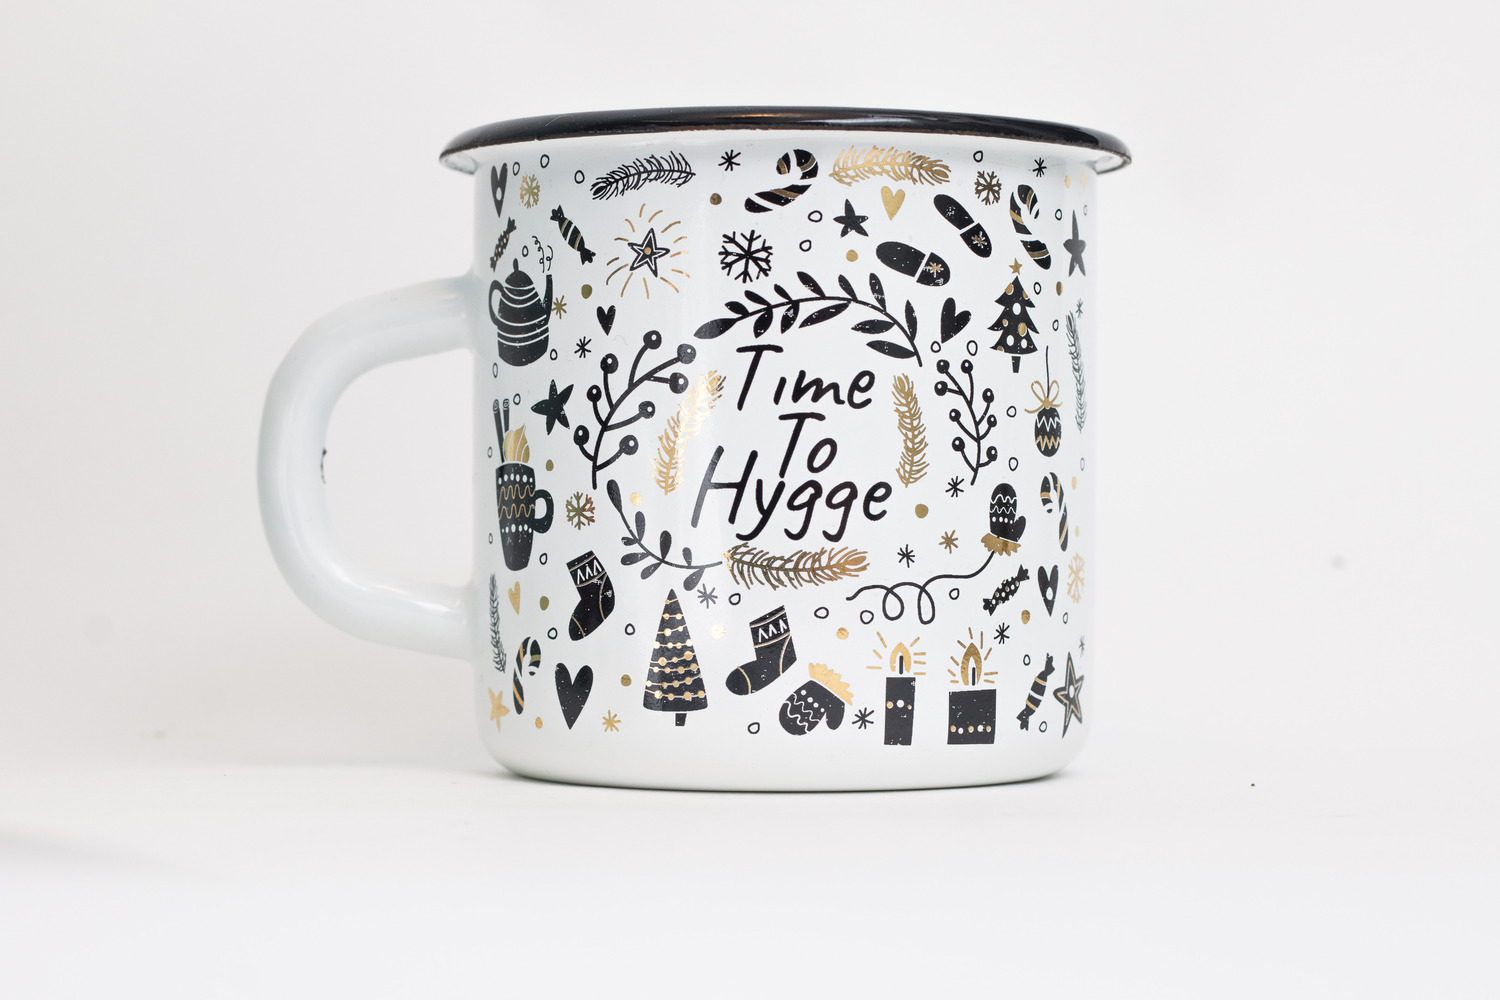 "Time to Hygge"